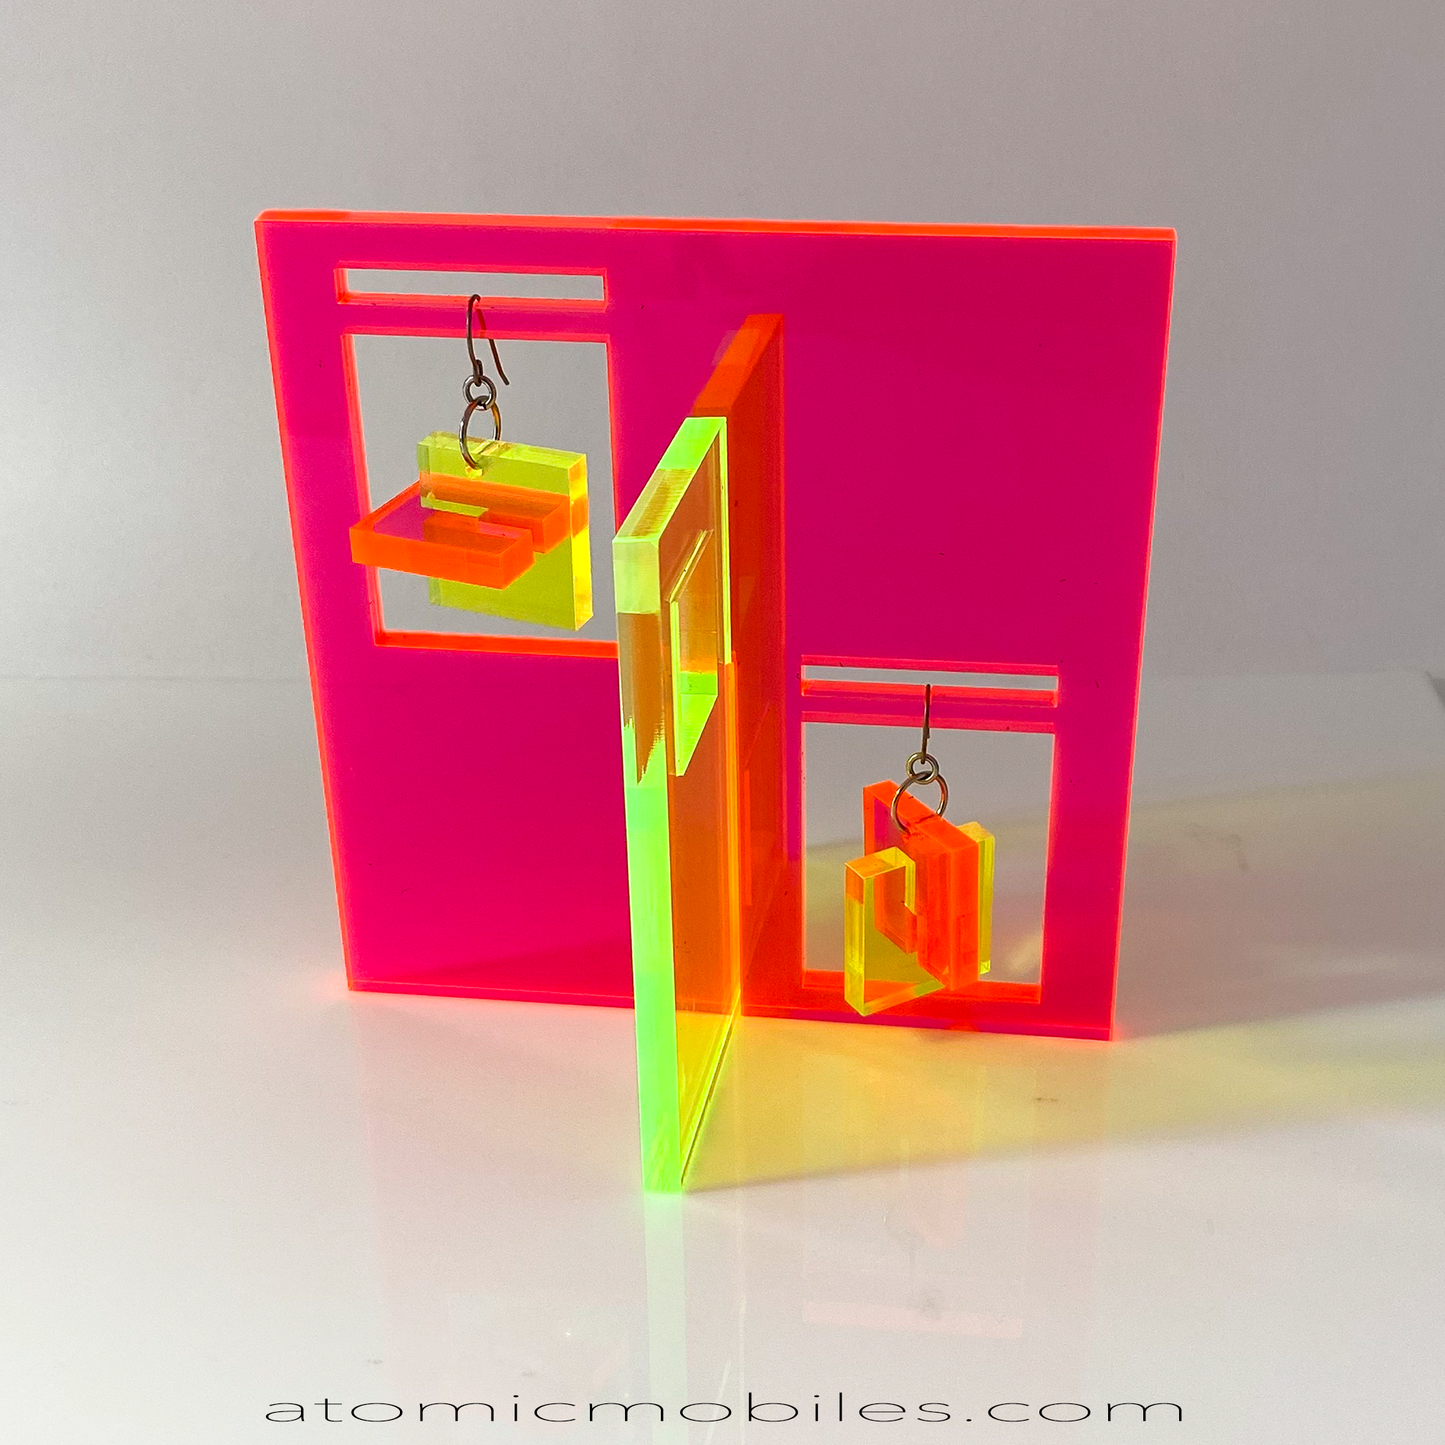 Pop Art Inspired Moderne Earrings and Art Stabile Set in fluorescent neon hot pink and green yellow - modern art sculpture stabile by AtomicMobiles.com